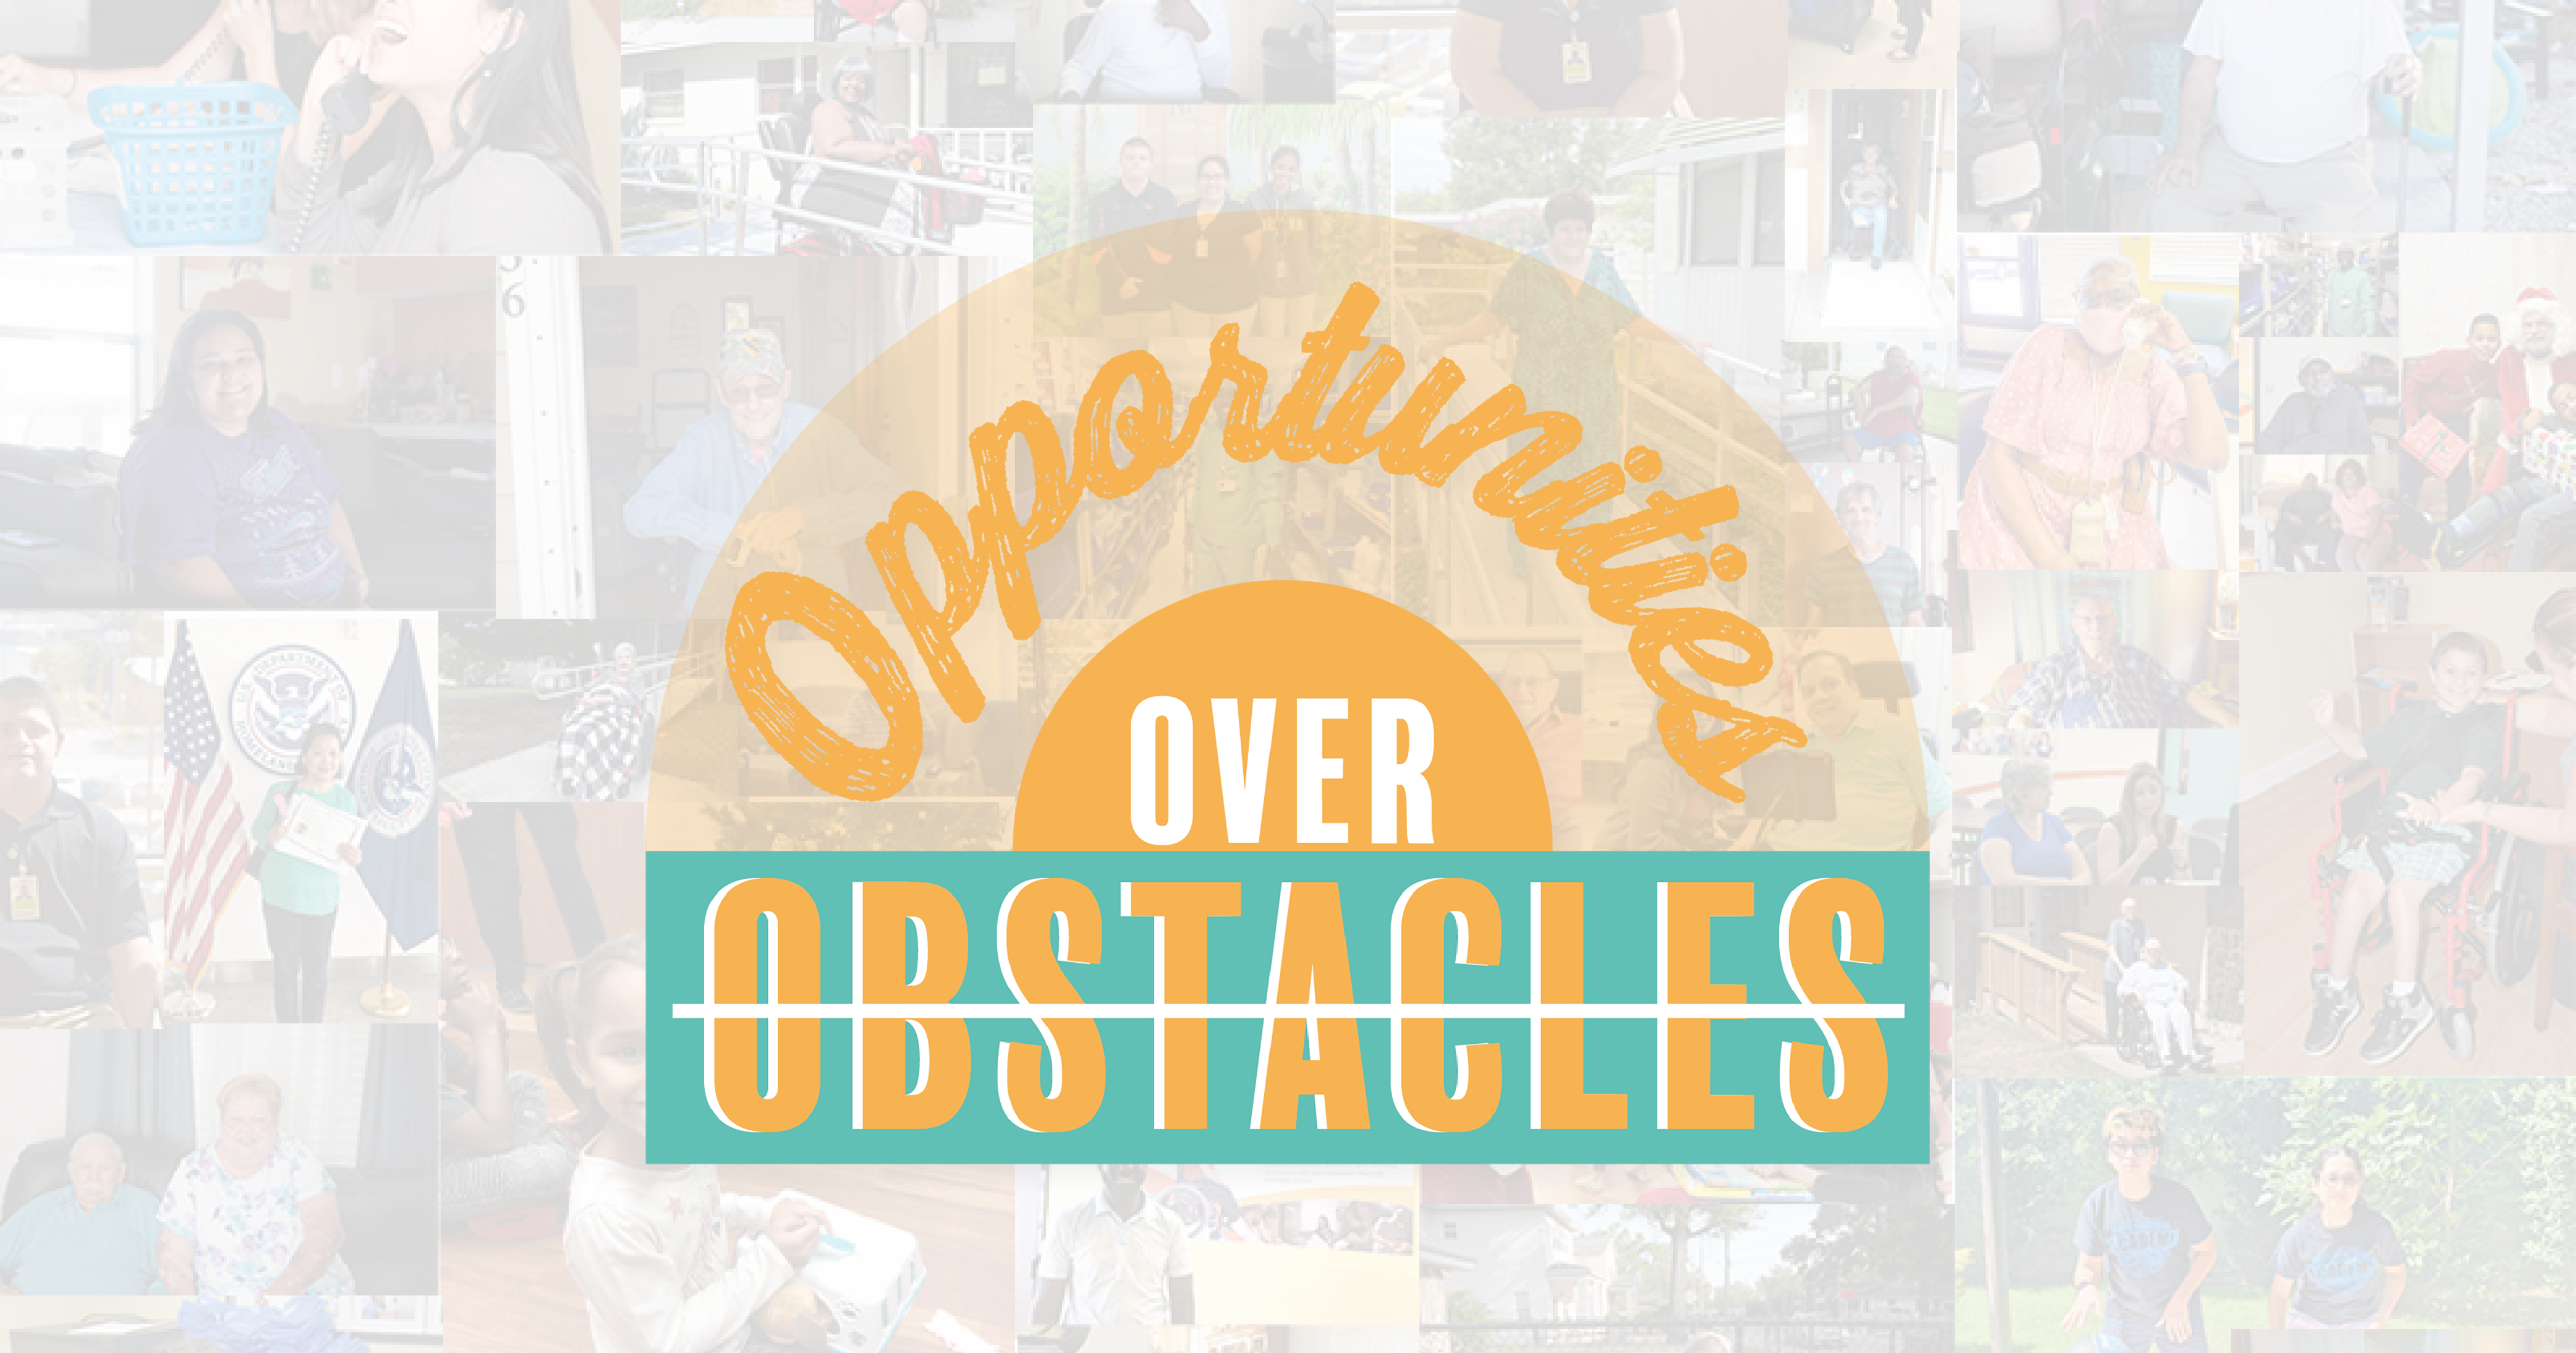 Image: low opacity background is collage of different people that CIL has helped. On top of collage is CIL "Opportunity Over Obstacles" fundraising campaign logo.